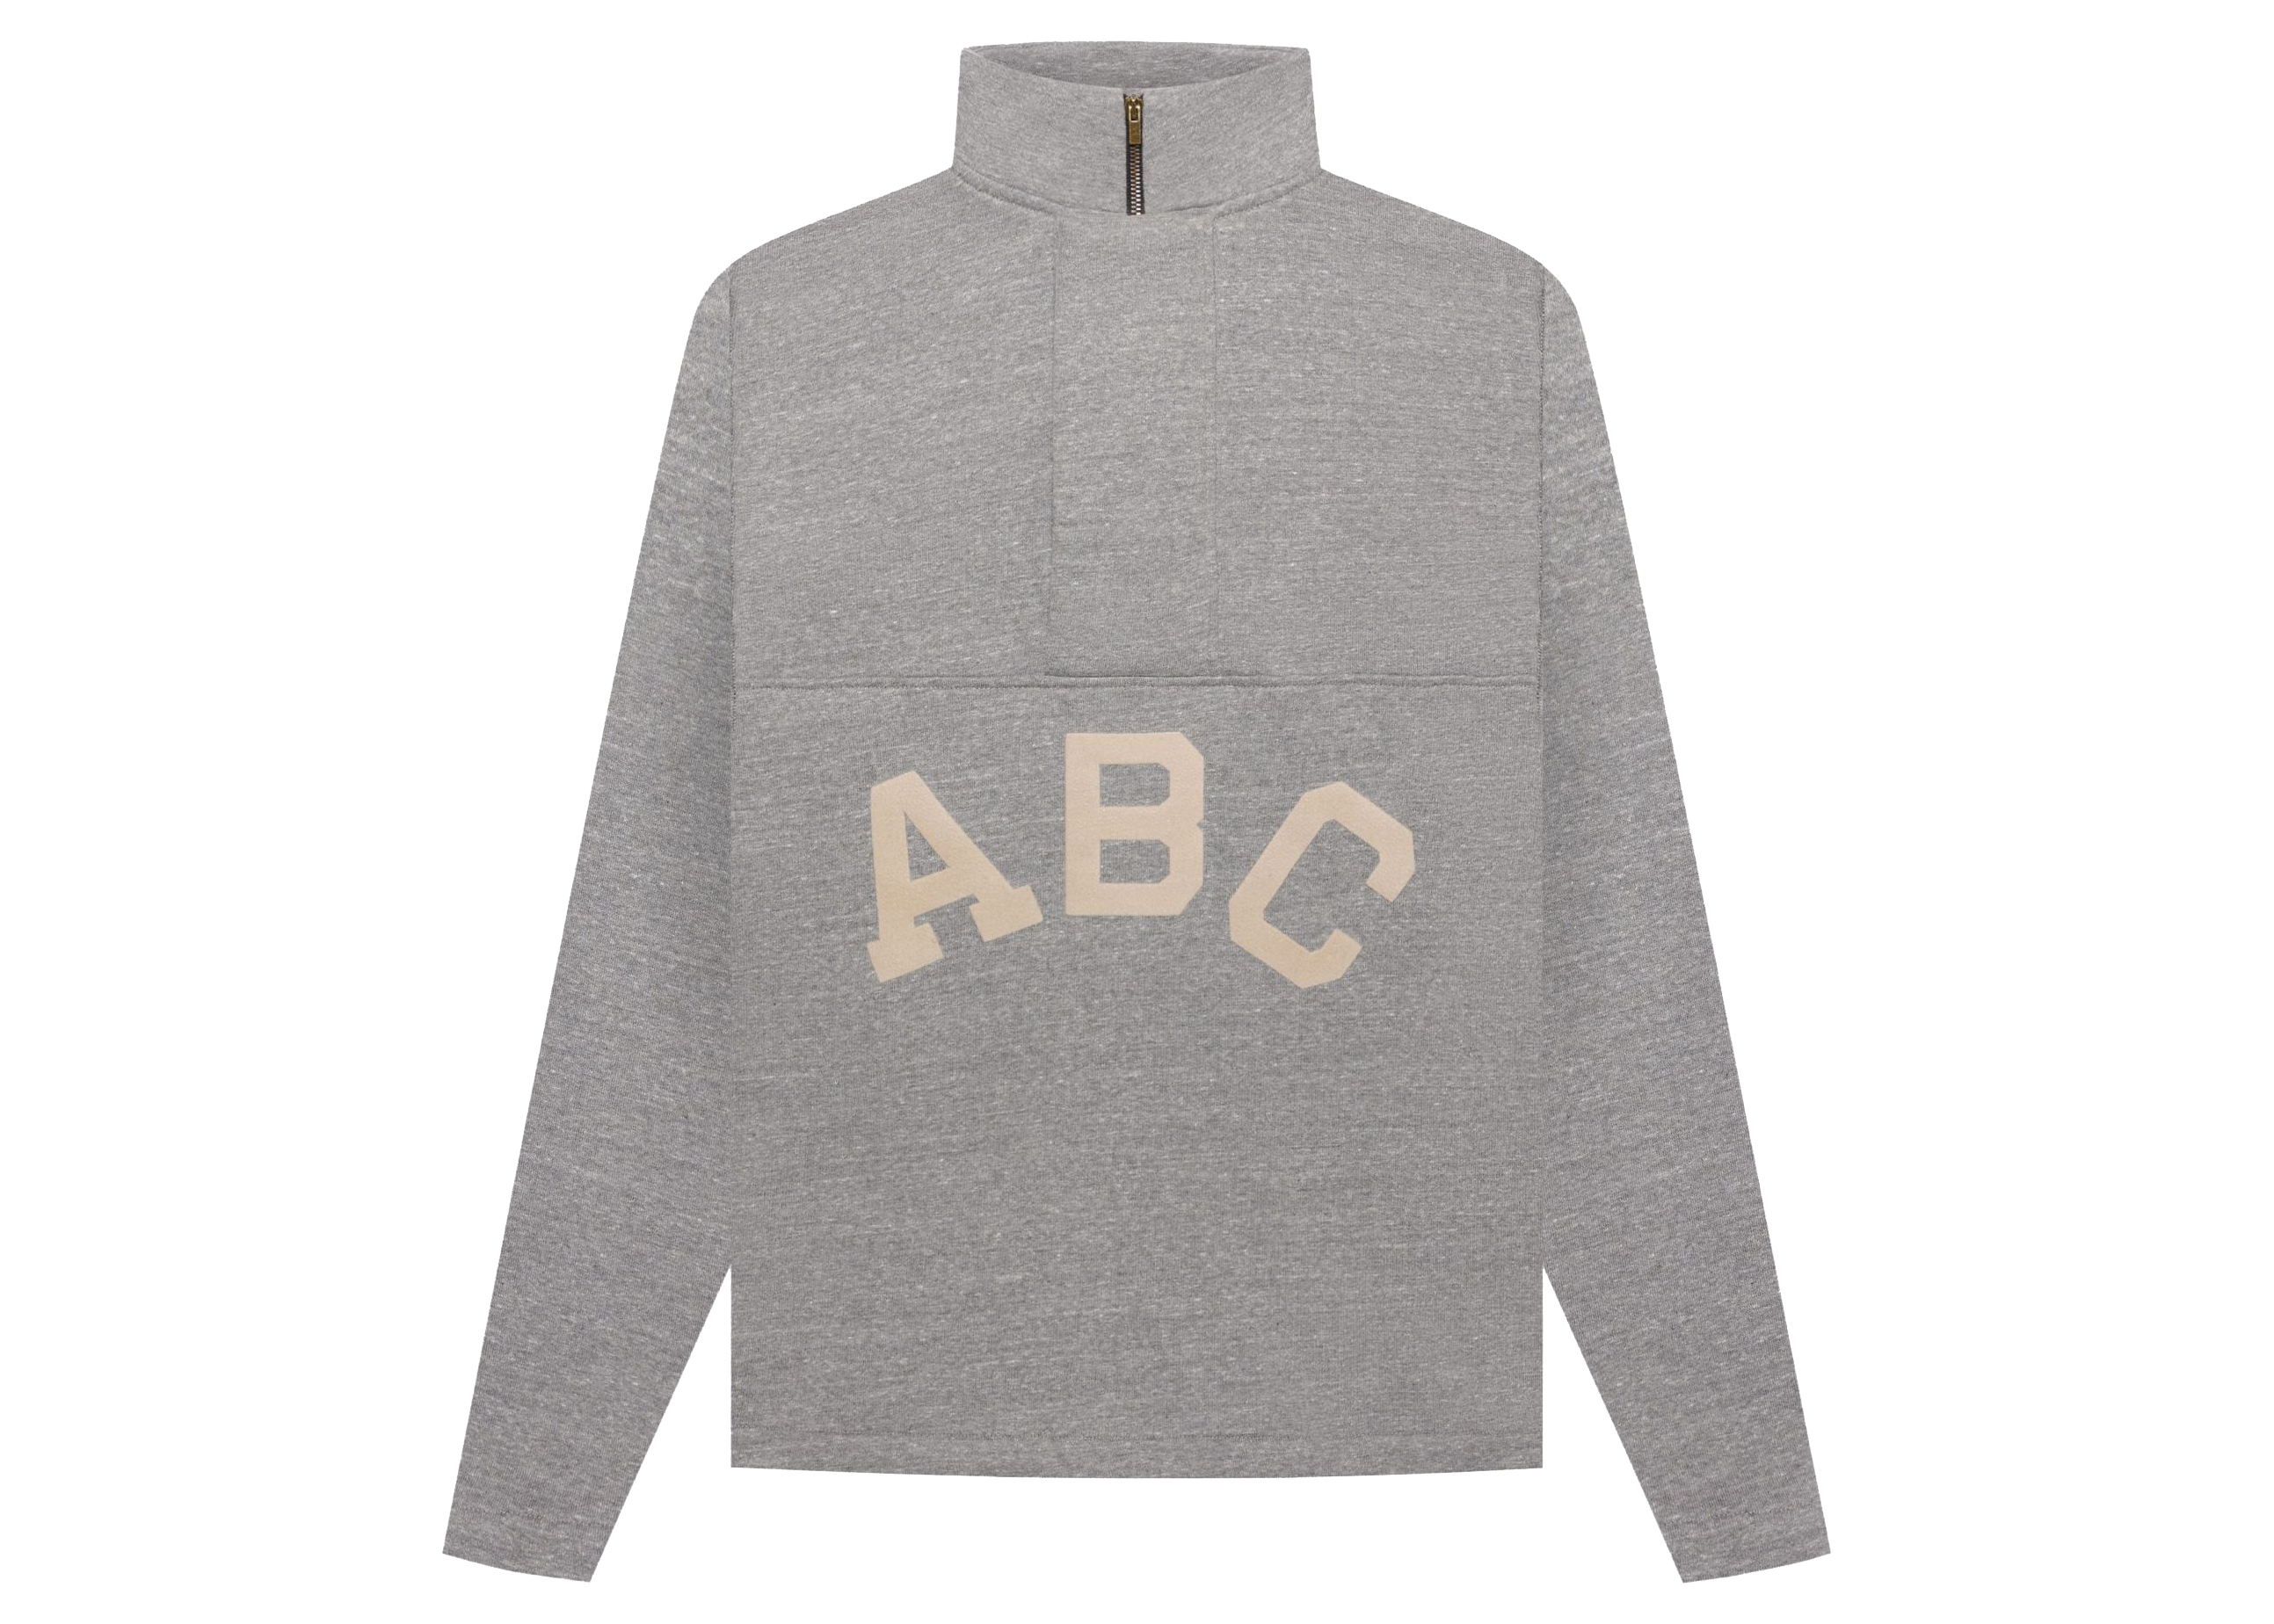 ABCFEAR OF GOD 7th collection ABC Tシャツ